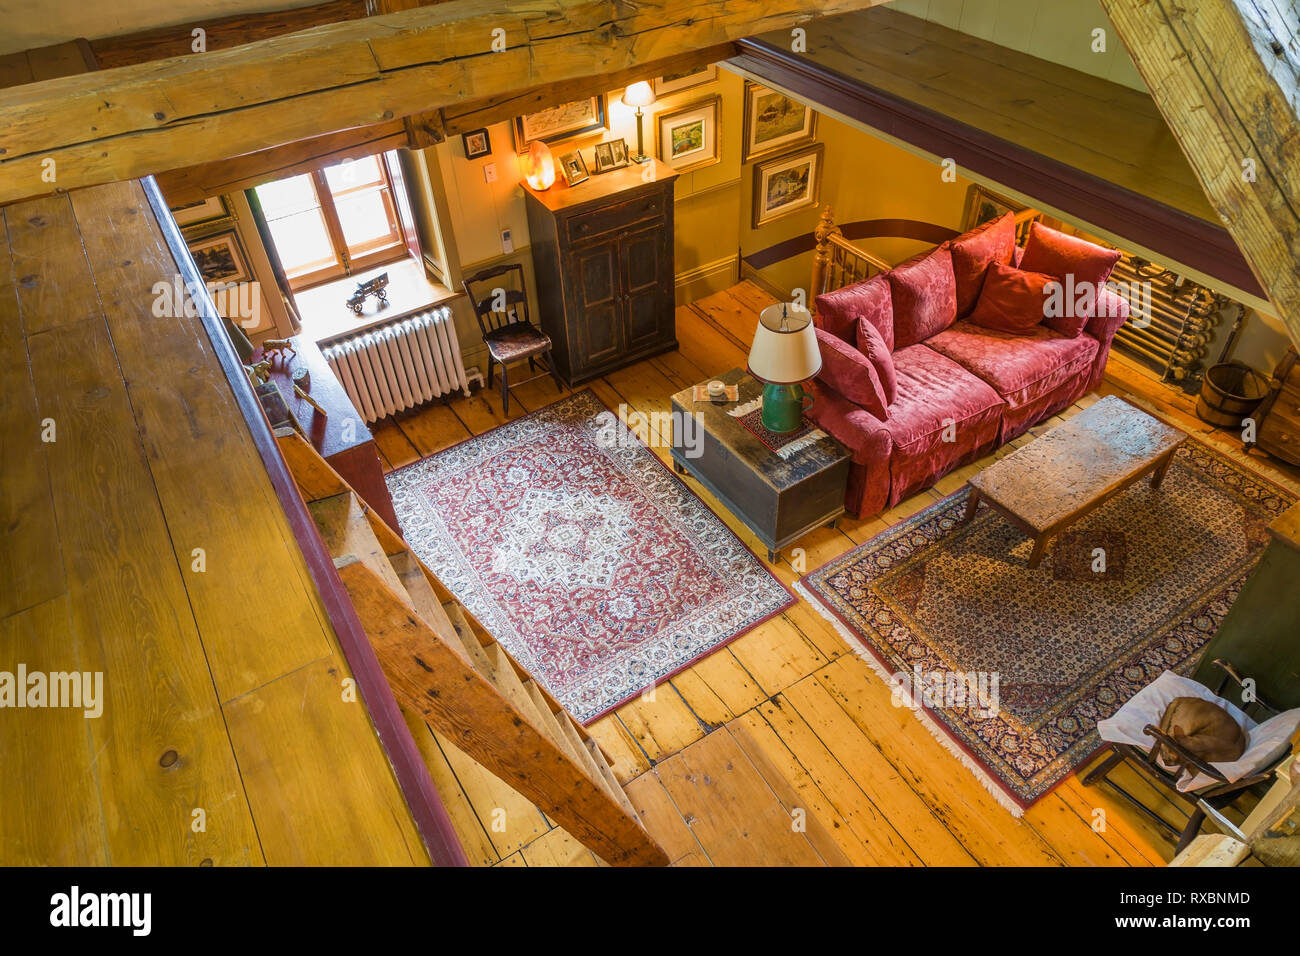 Top view of upstairs family room with wooden Miller's stairs, crimson red upholstered sofa, chest of drawers, armoire and rugs inside an old circa 1805 Canadiana cottage style home, Quebec, Canada. This image is property released. CUPR0323 Stock Photo